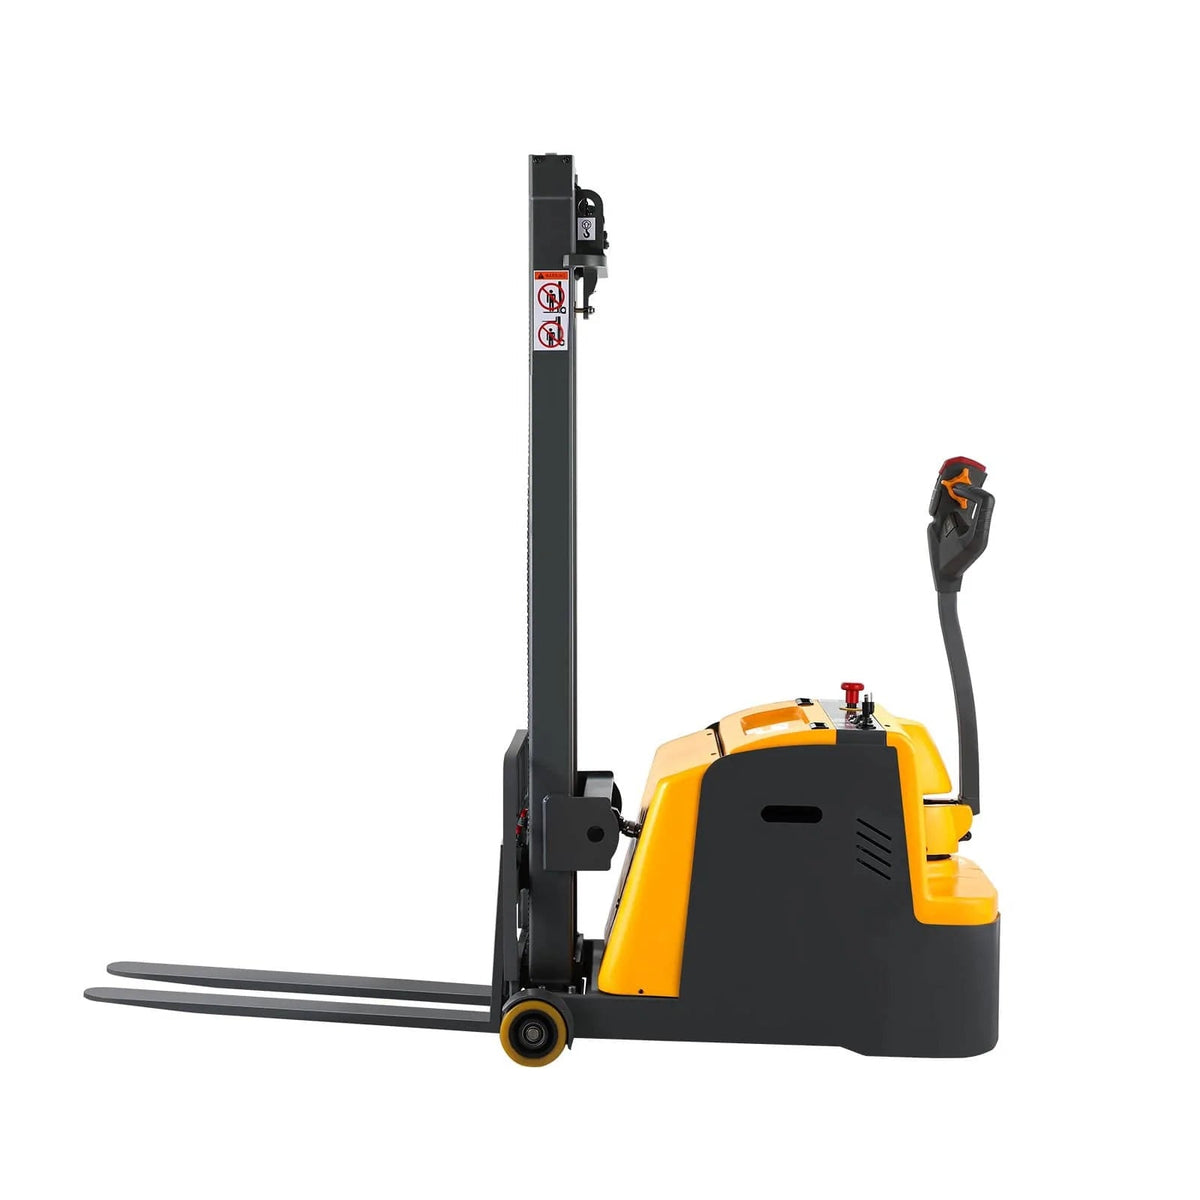 Apollolift A-3031 Counterbalanced Electric Stacker 118" Lifting Height 1212 lbs. Capacity New